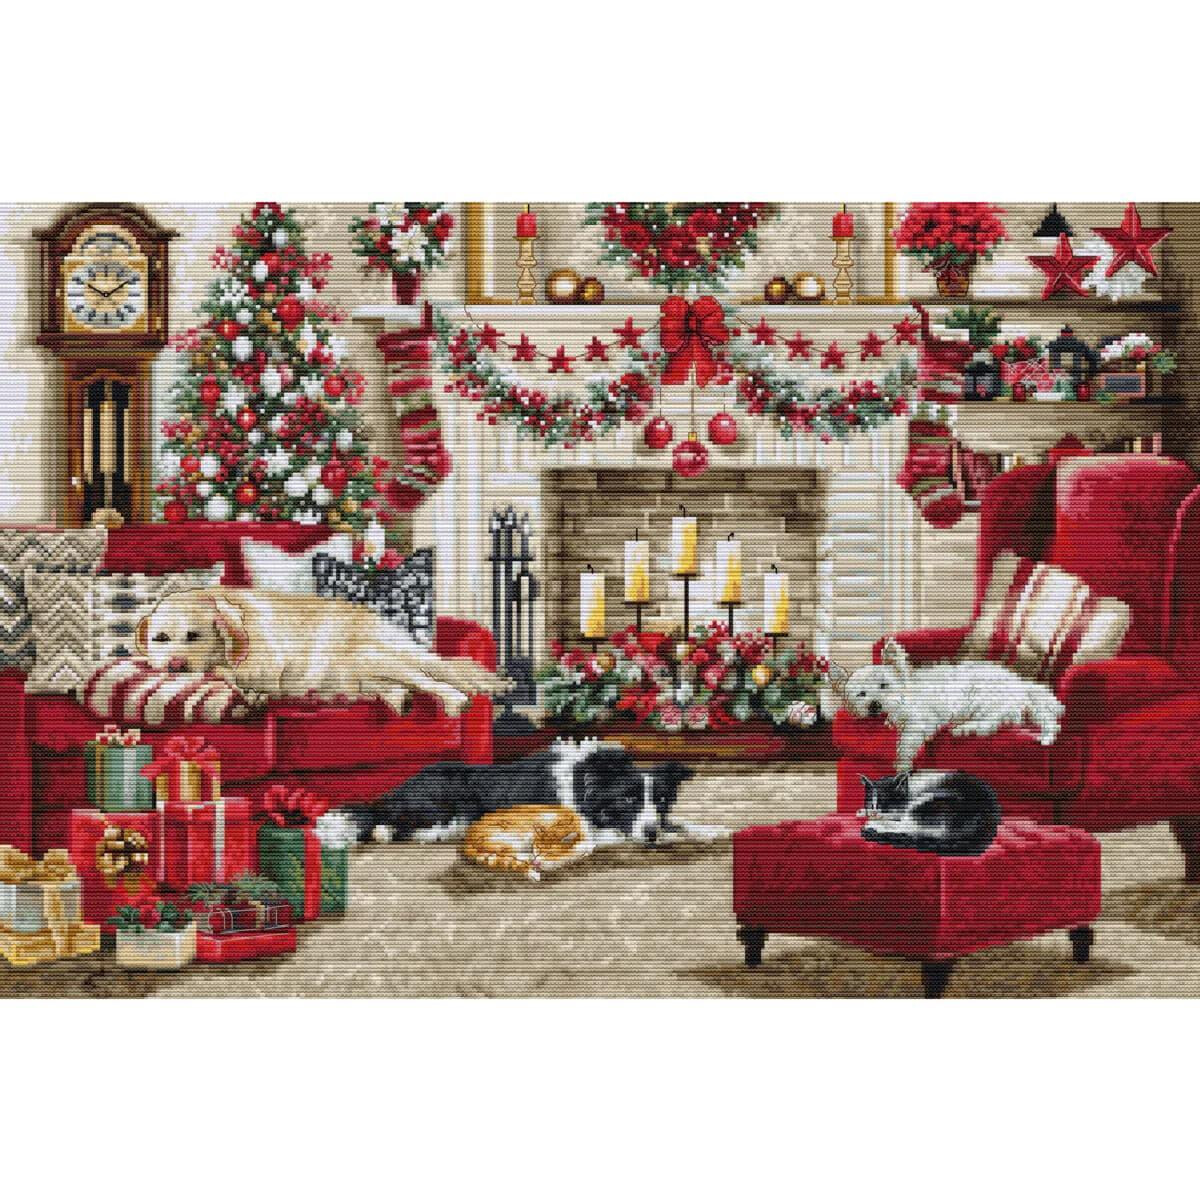 A cozy living room, decorated for Christmas with a...